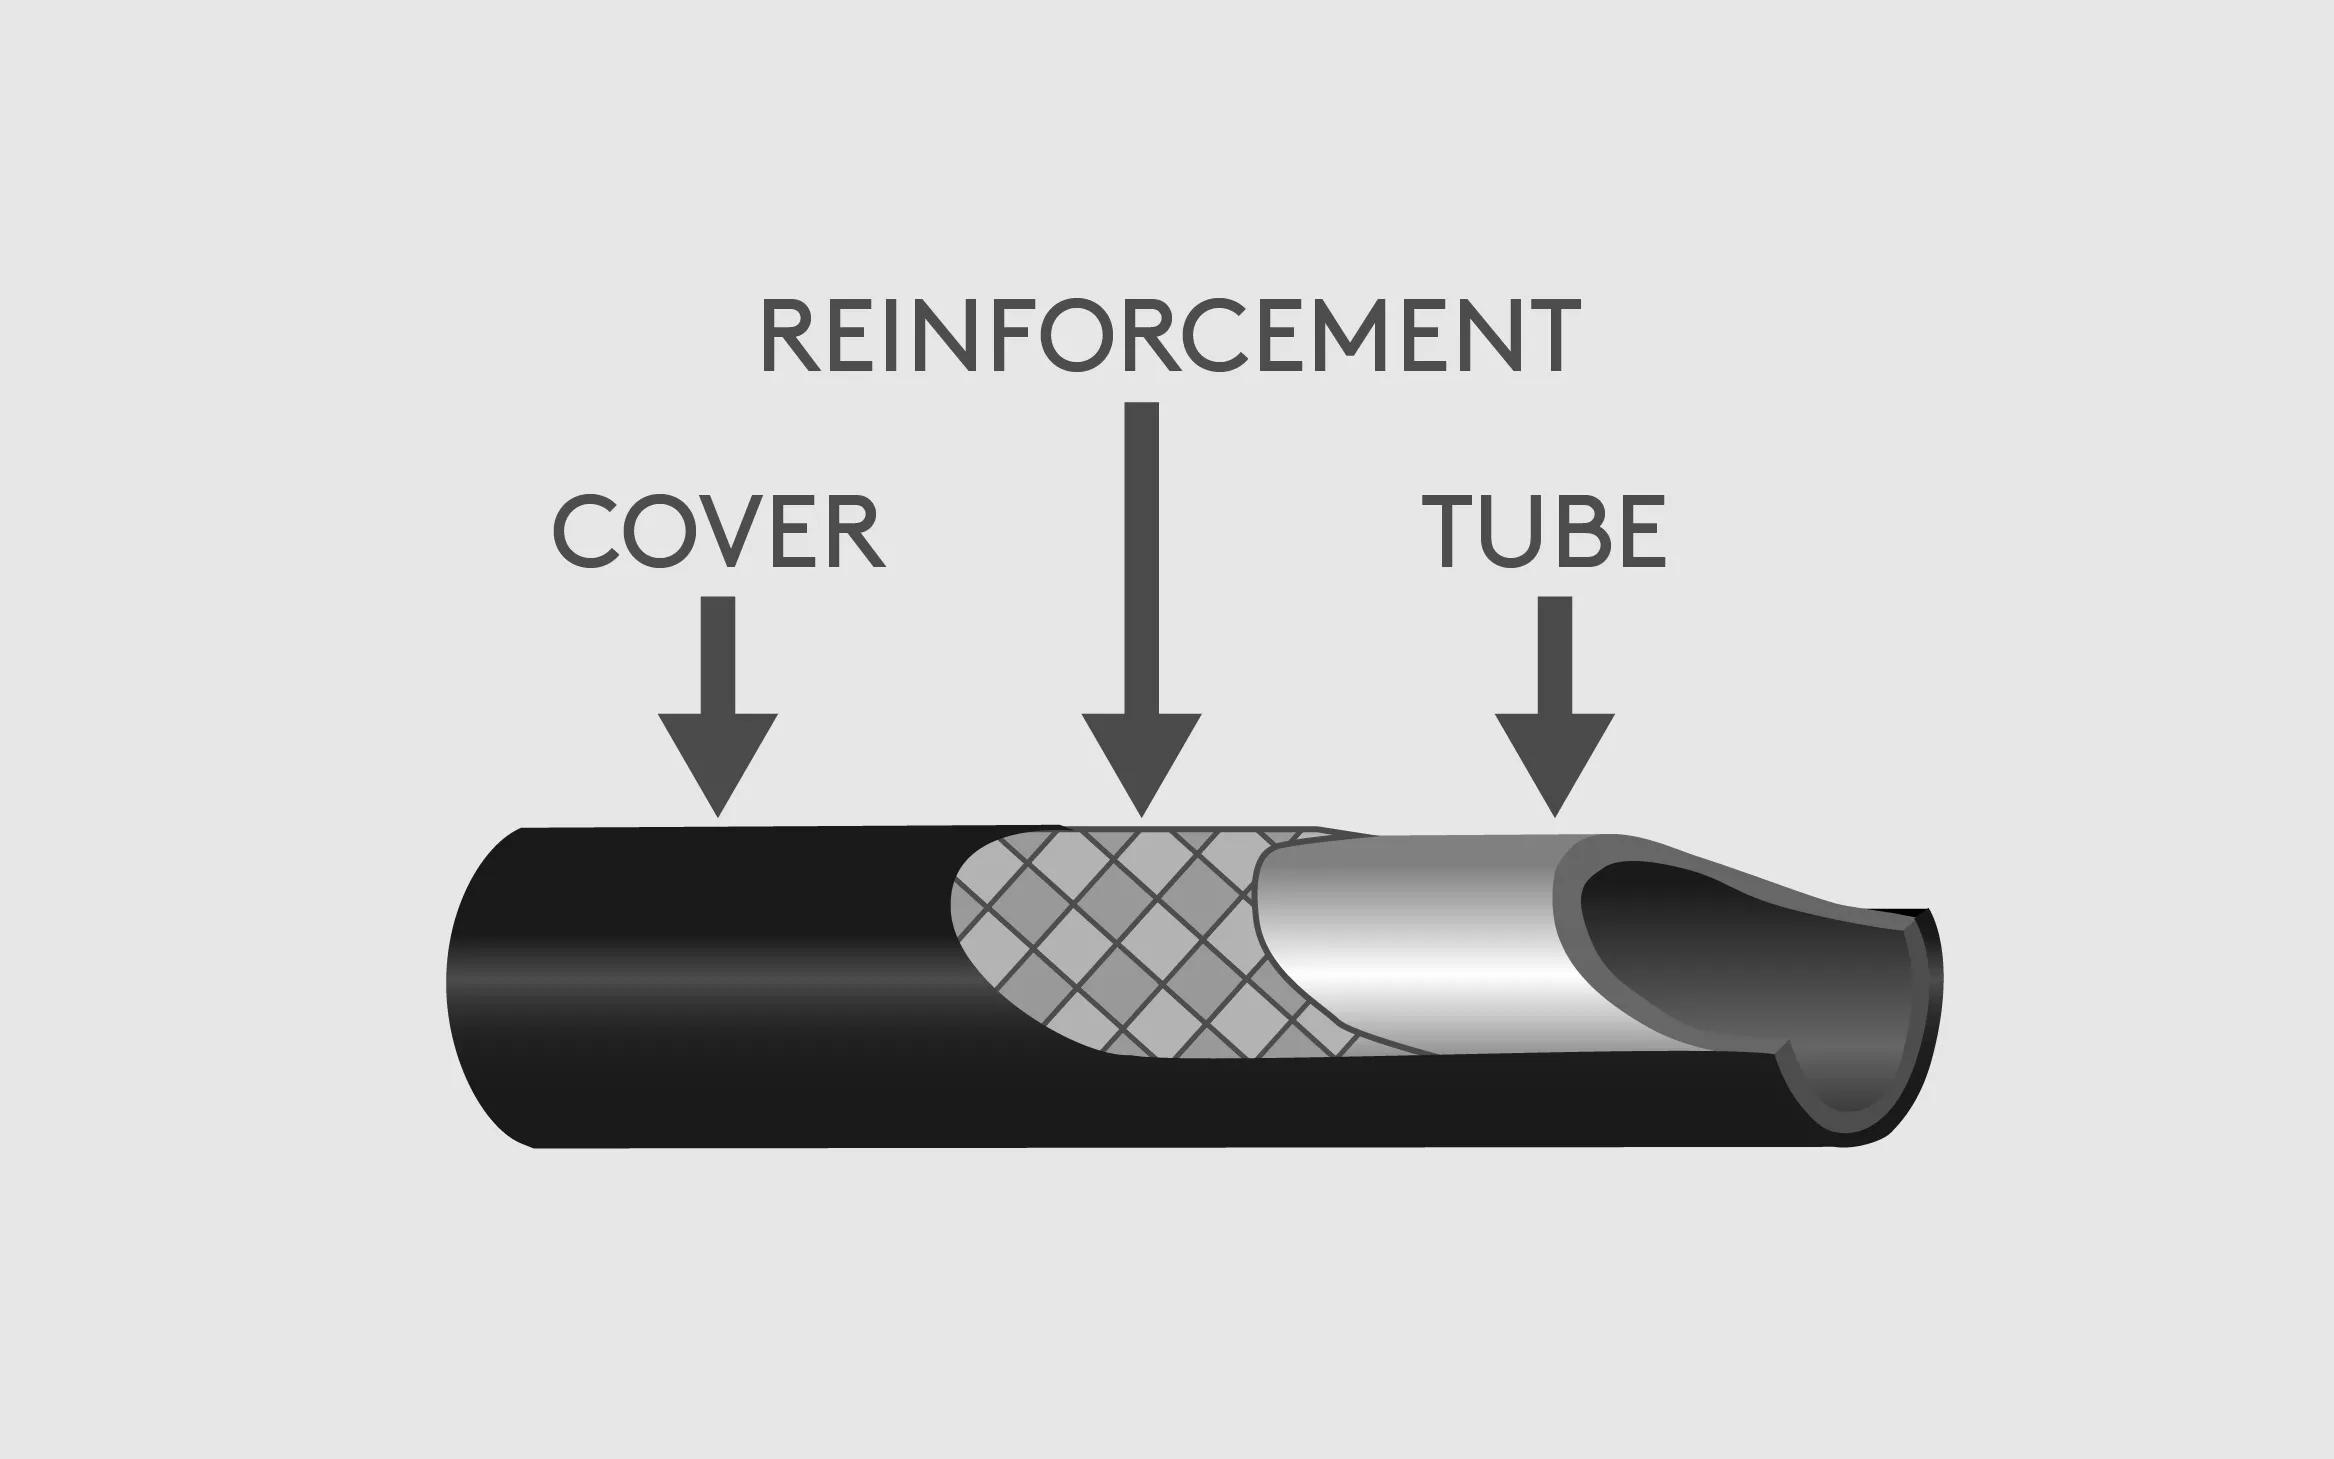 image of hydraulic hose fitting with cover, tube and reinforcement 